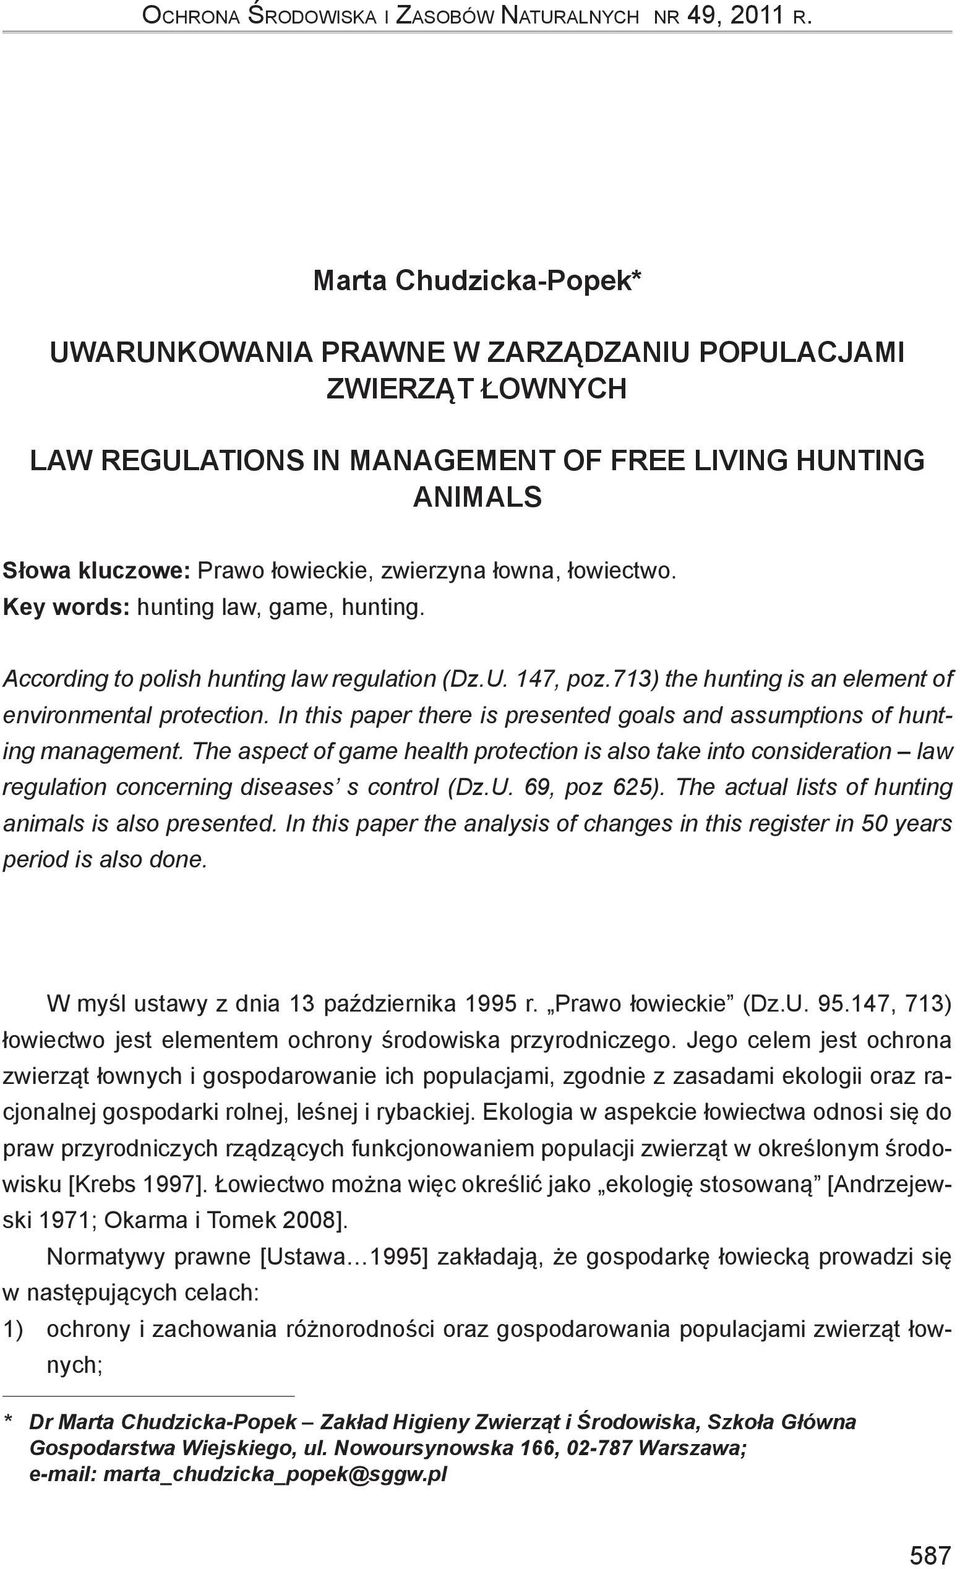 łowiectwo. Key words: hunting law, game, hunting. According to polish hunting law regulation (Dz.U. 147, poz.713) the hunting is an element of environmental protection.